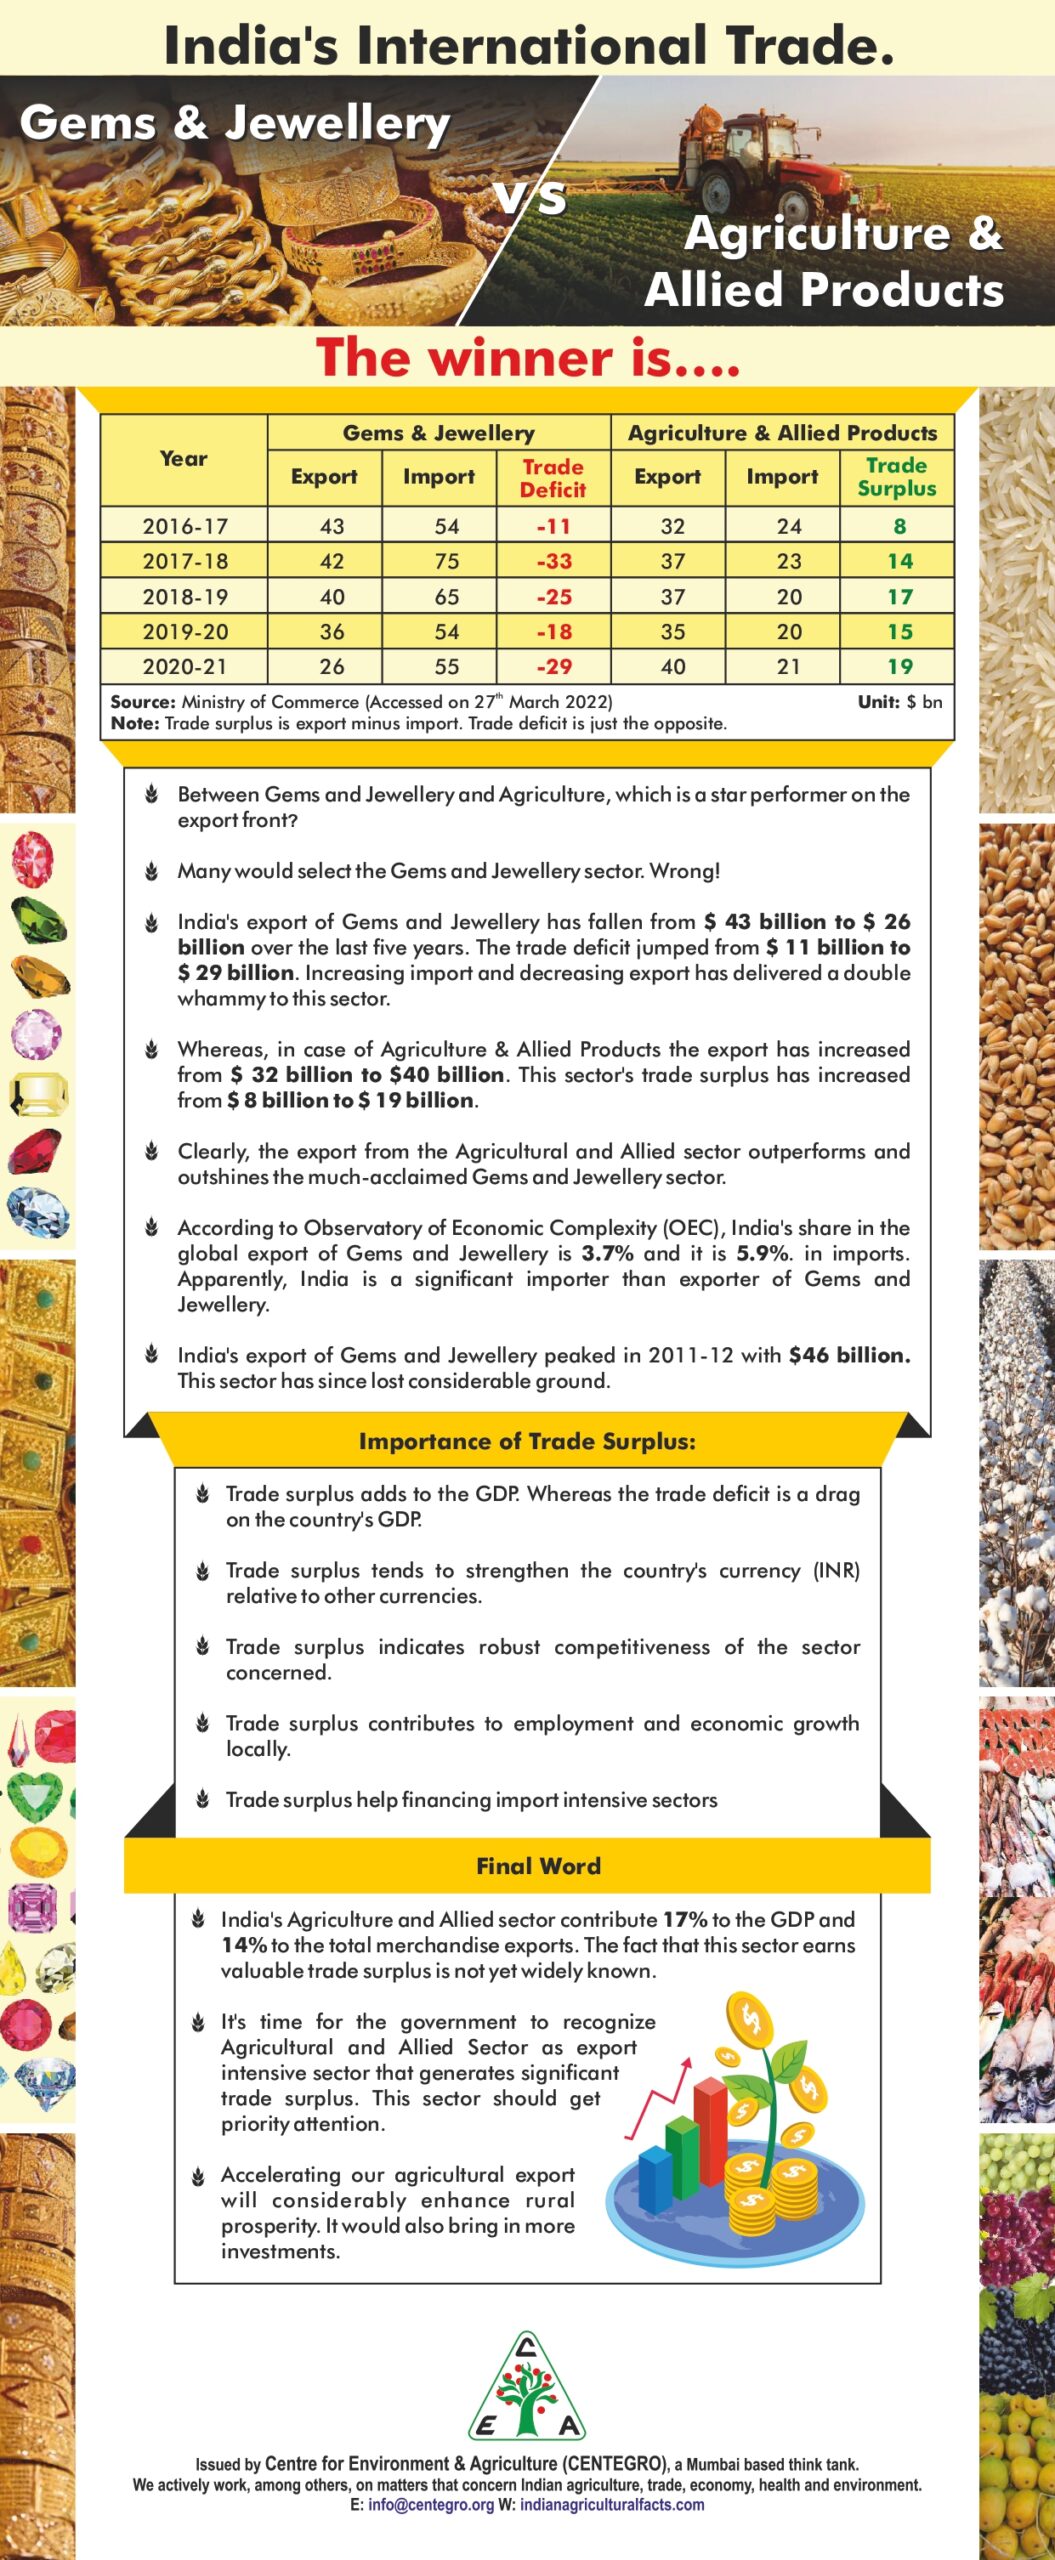 indias international trade gems and Jewellery vs agriculture and allied products infographic_page-0001